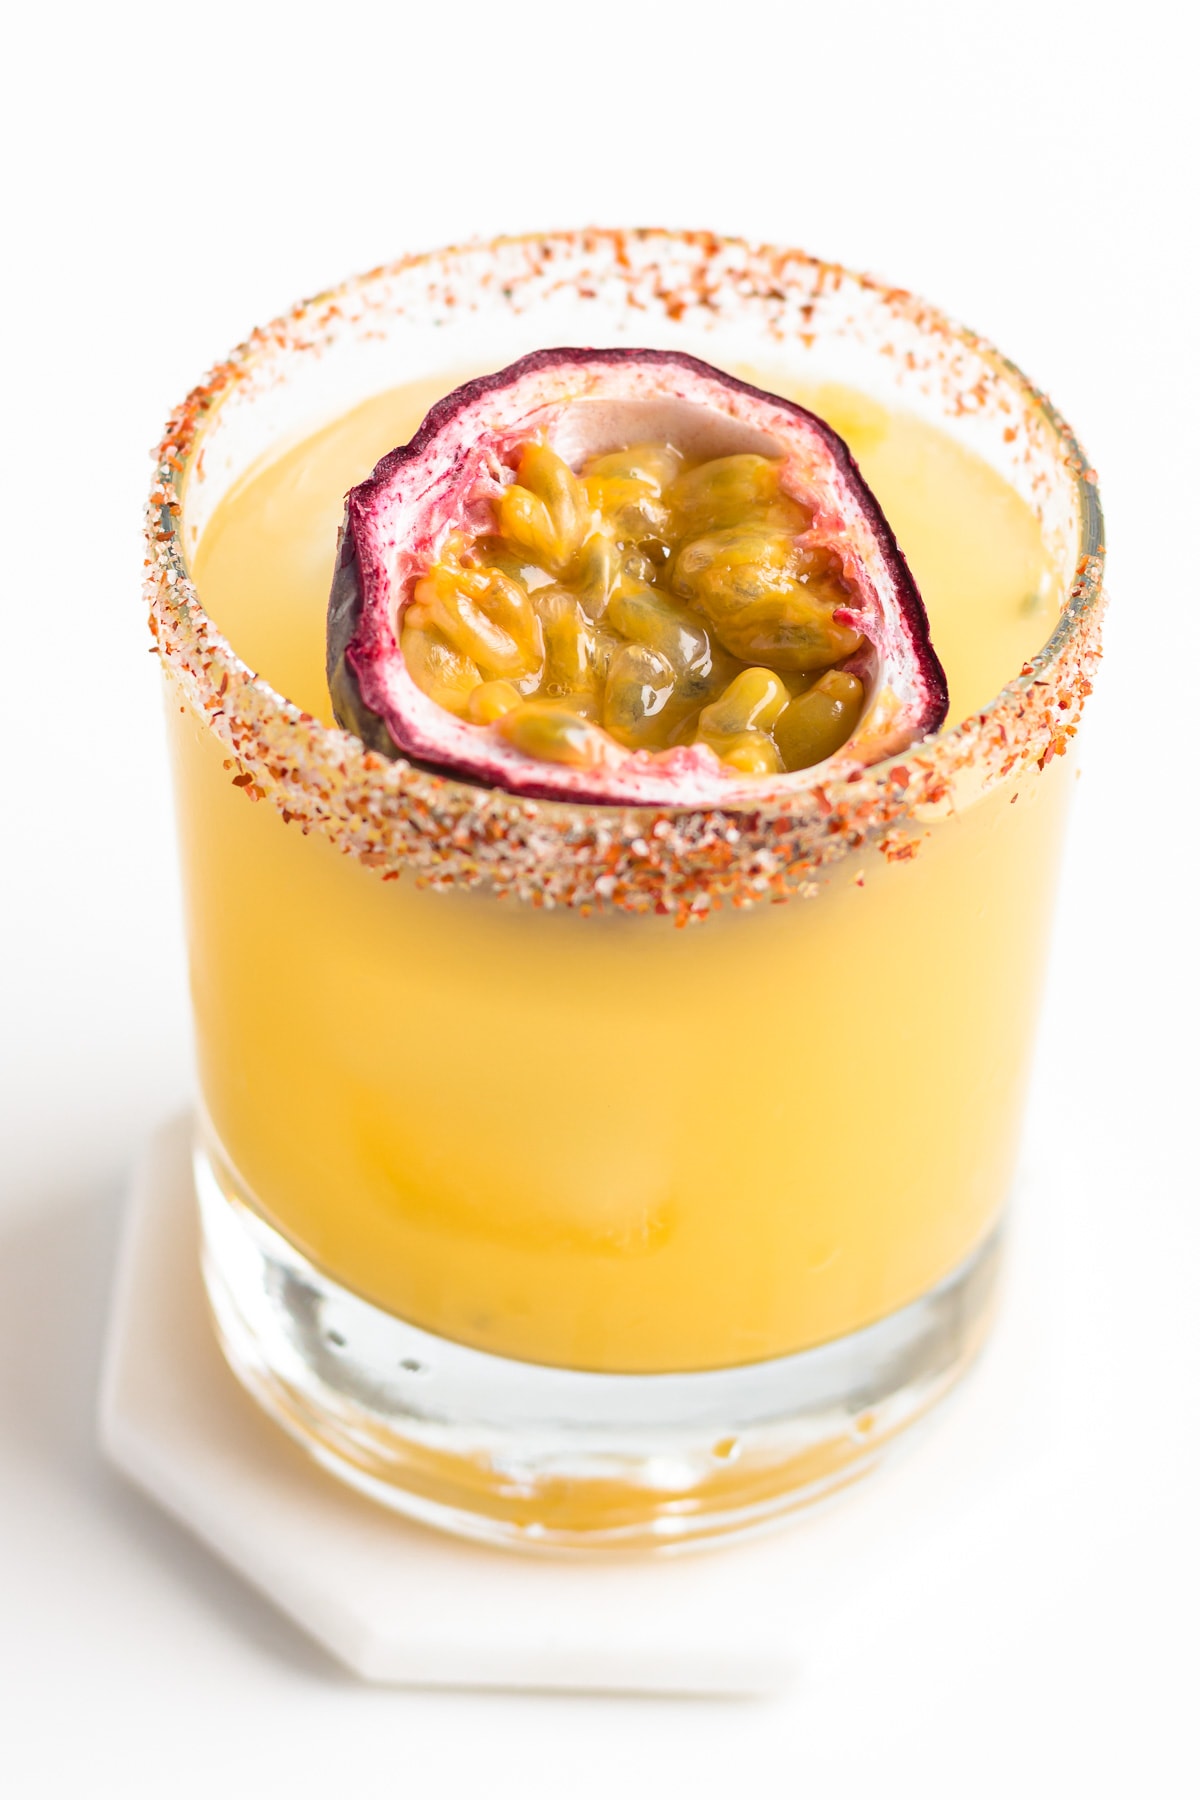 A passion fruit margarita with half a passion fruit floating on top.